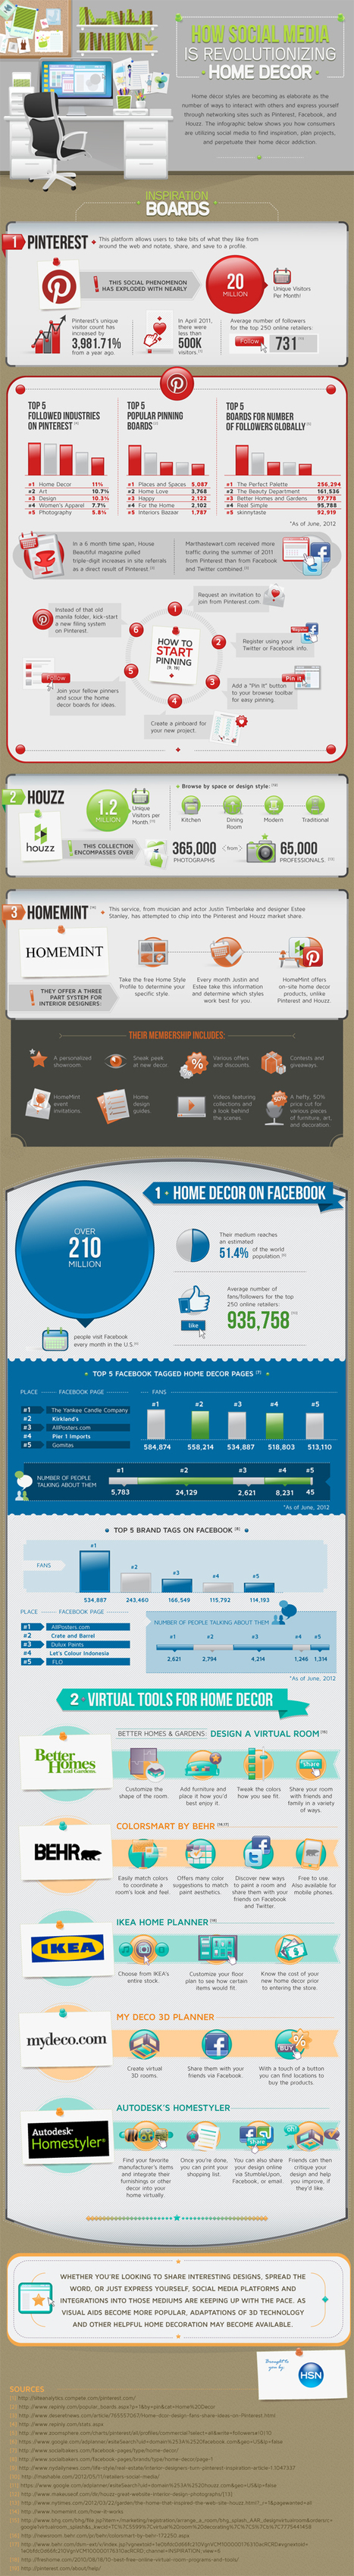 How Pinterest Is Revolutionizing The Home Decor Industry [Infographic] | MarketingHits | Scoop.it